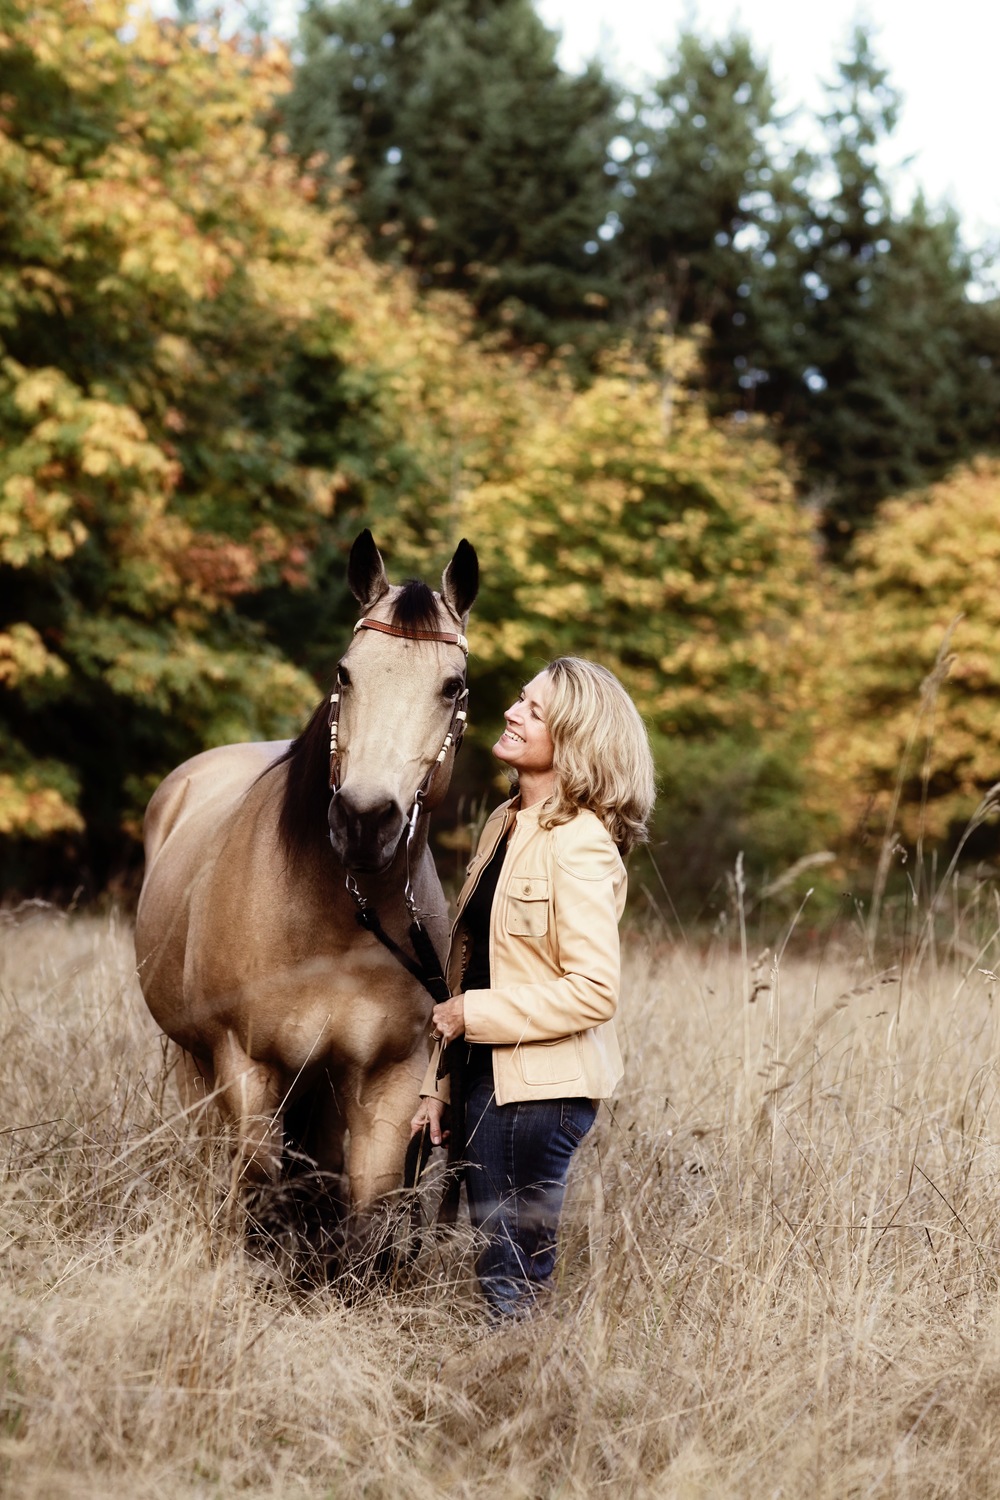 Gallery Photo of Equine Assisted Therapy...an experiential and integrative approach to healing.